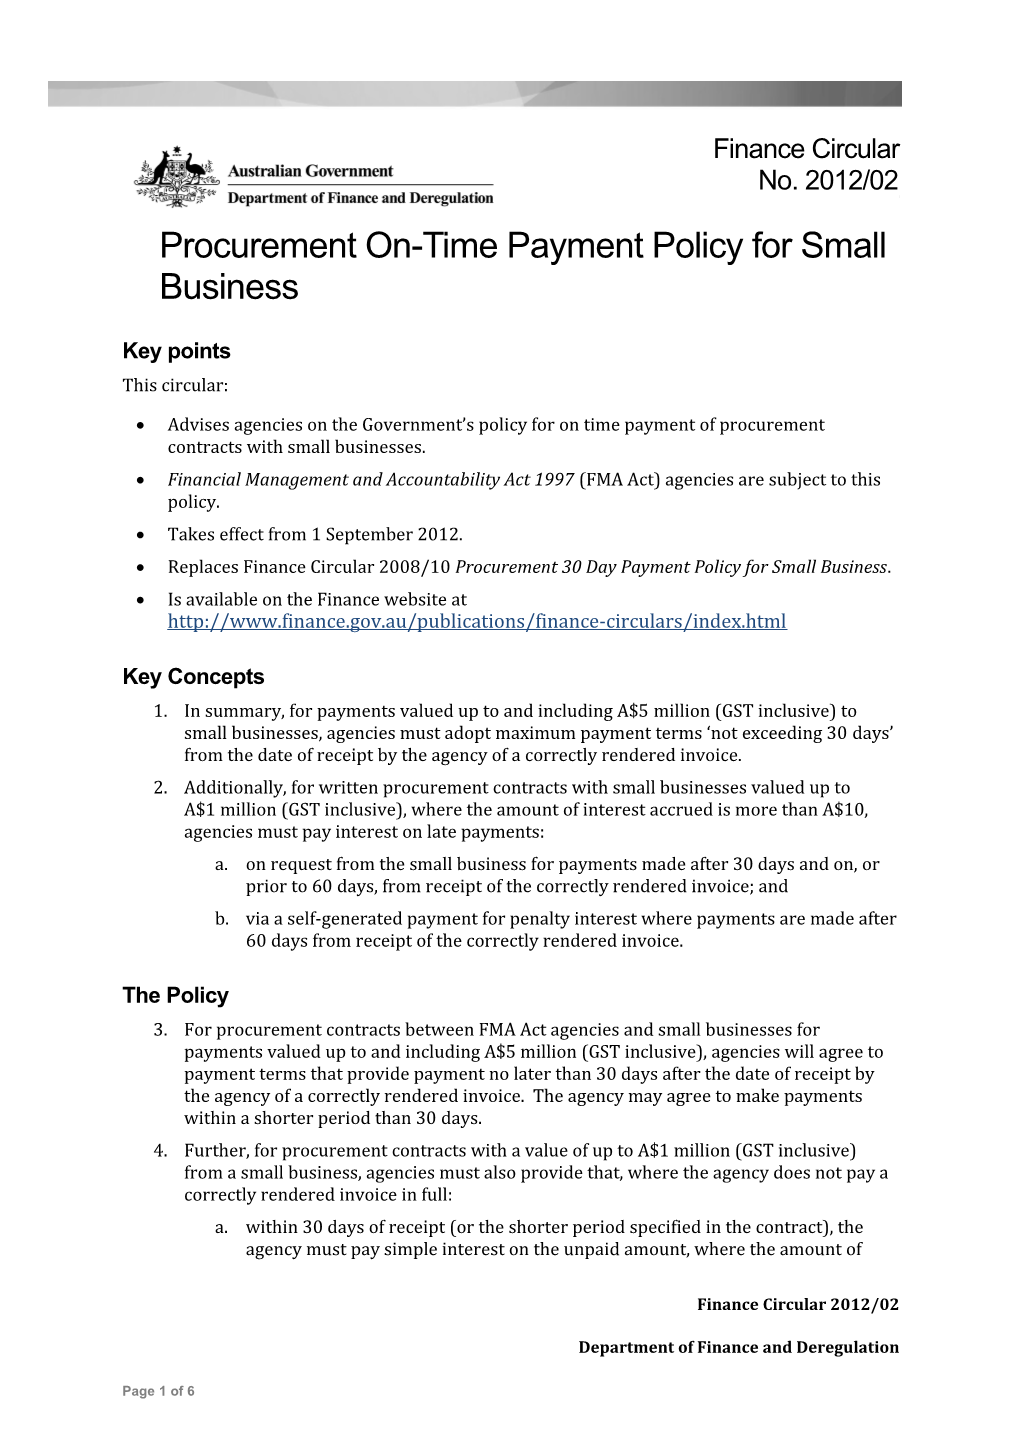 Finance Circular No. 2012/02 - Procurement On-Time Payment Policy for Small Business